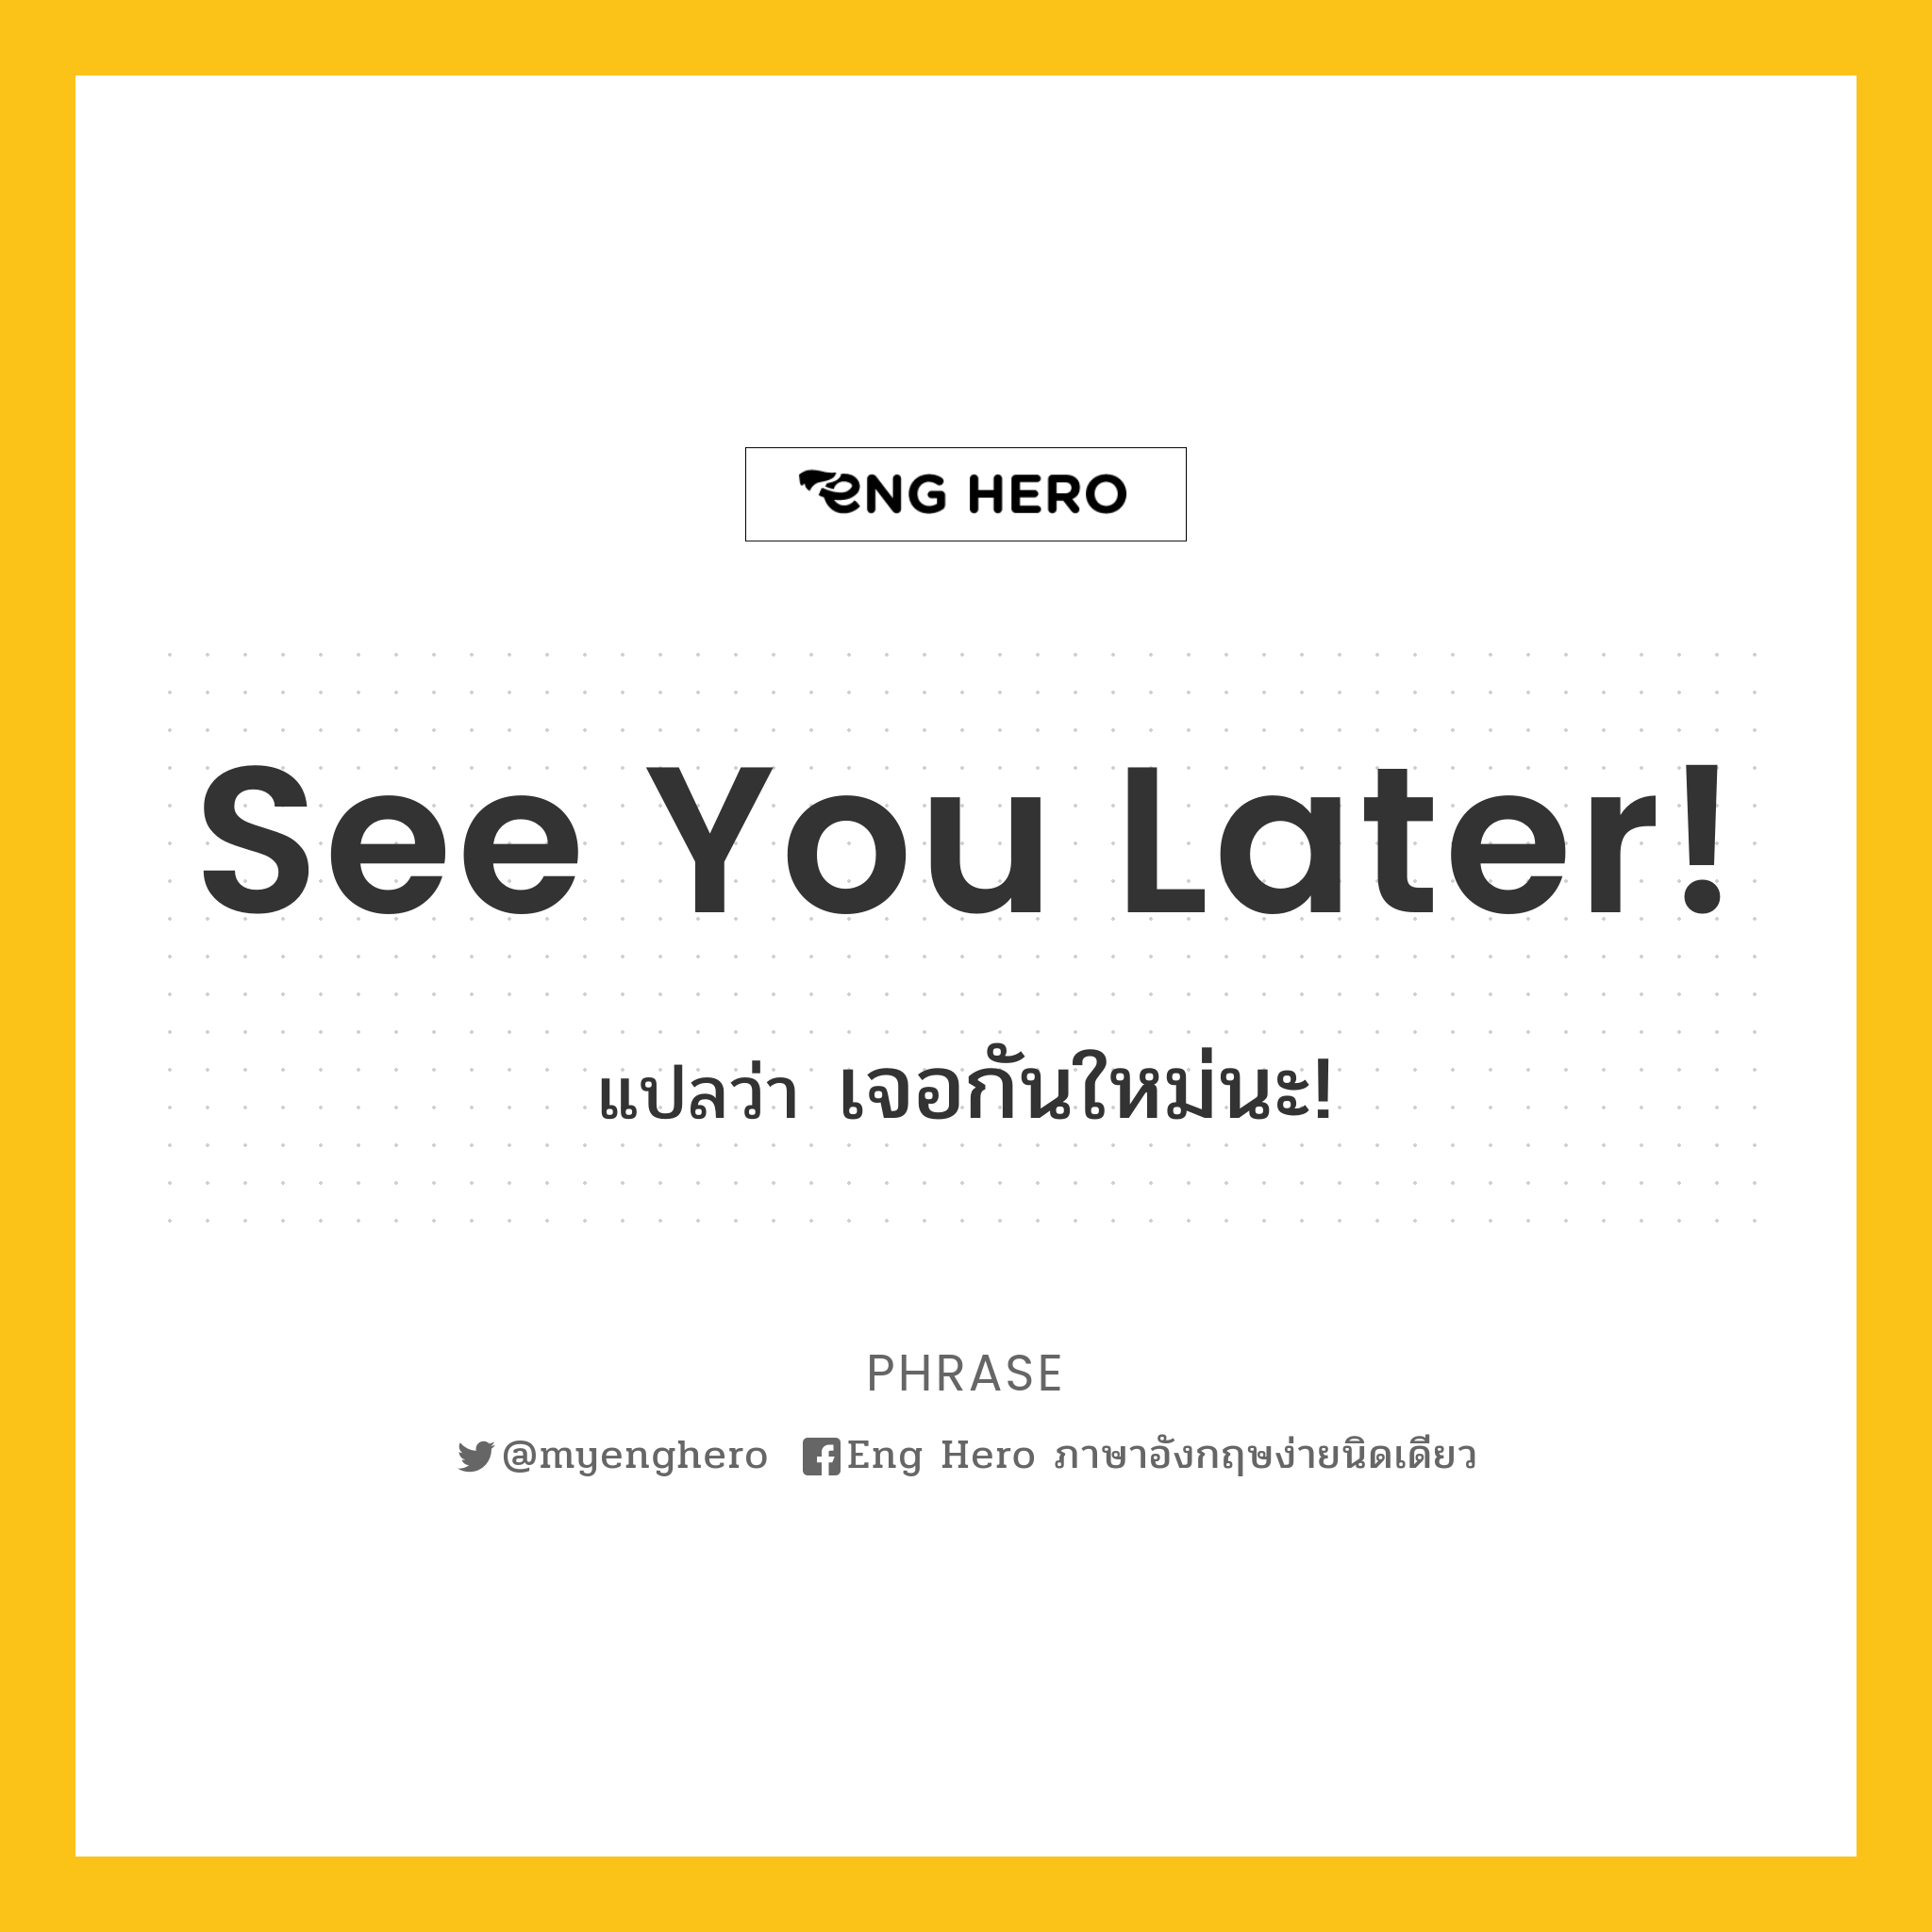 See you later!